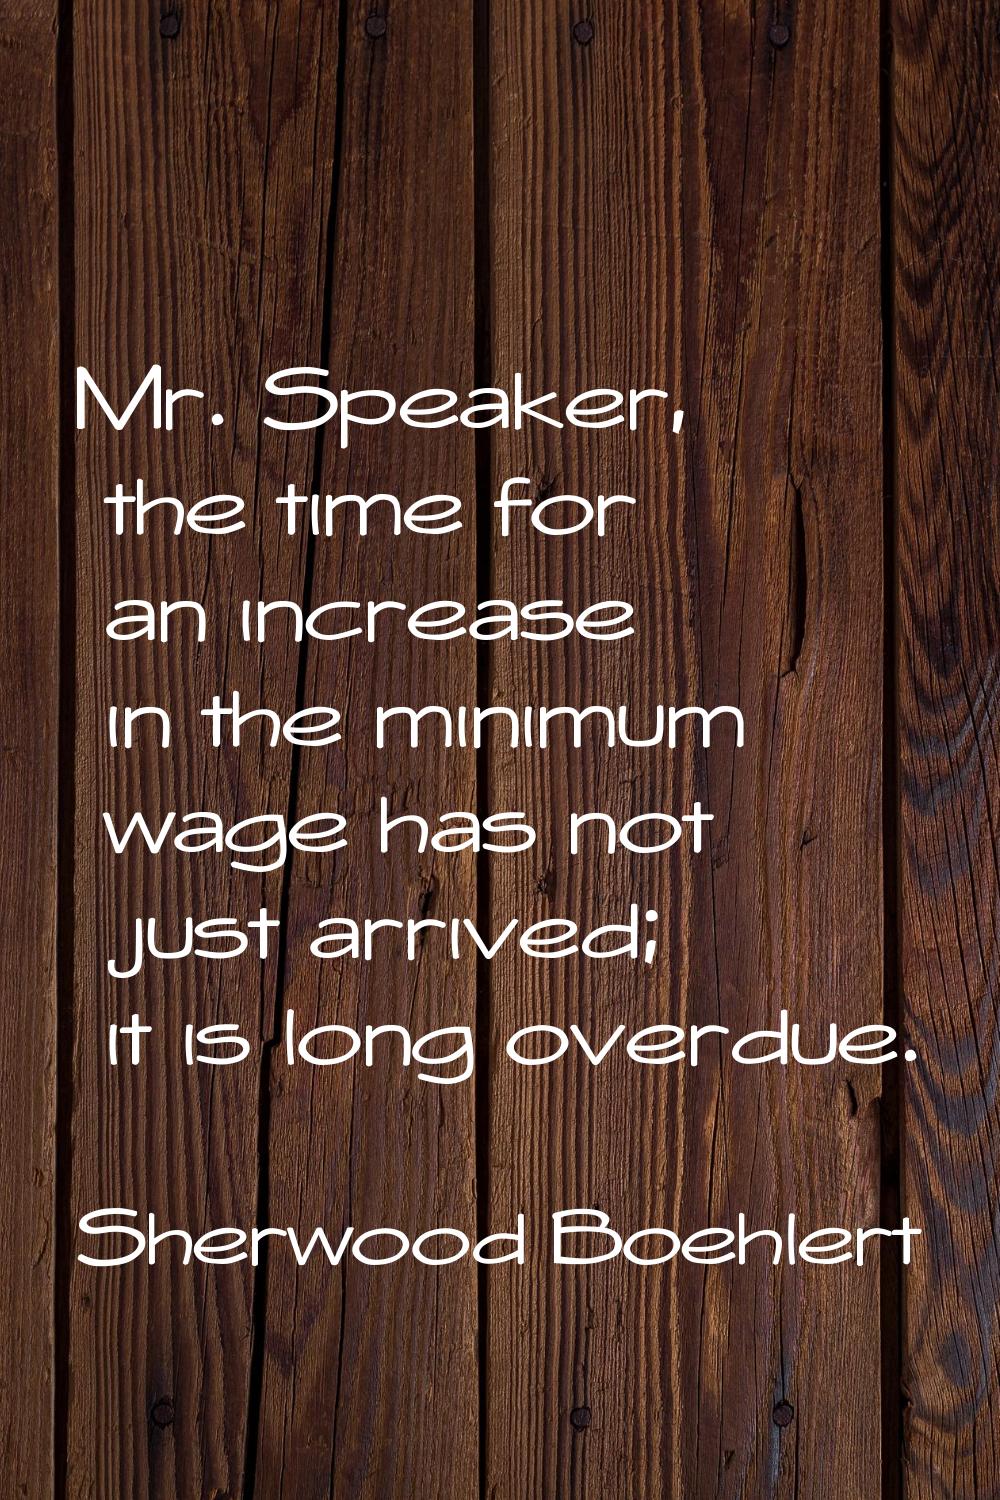 Mr. Speaker, the time for an increase in the minimum wage has not just arrived; it is long overdue.